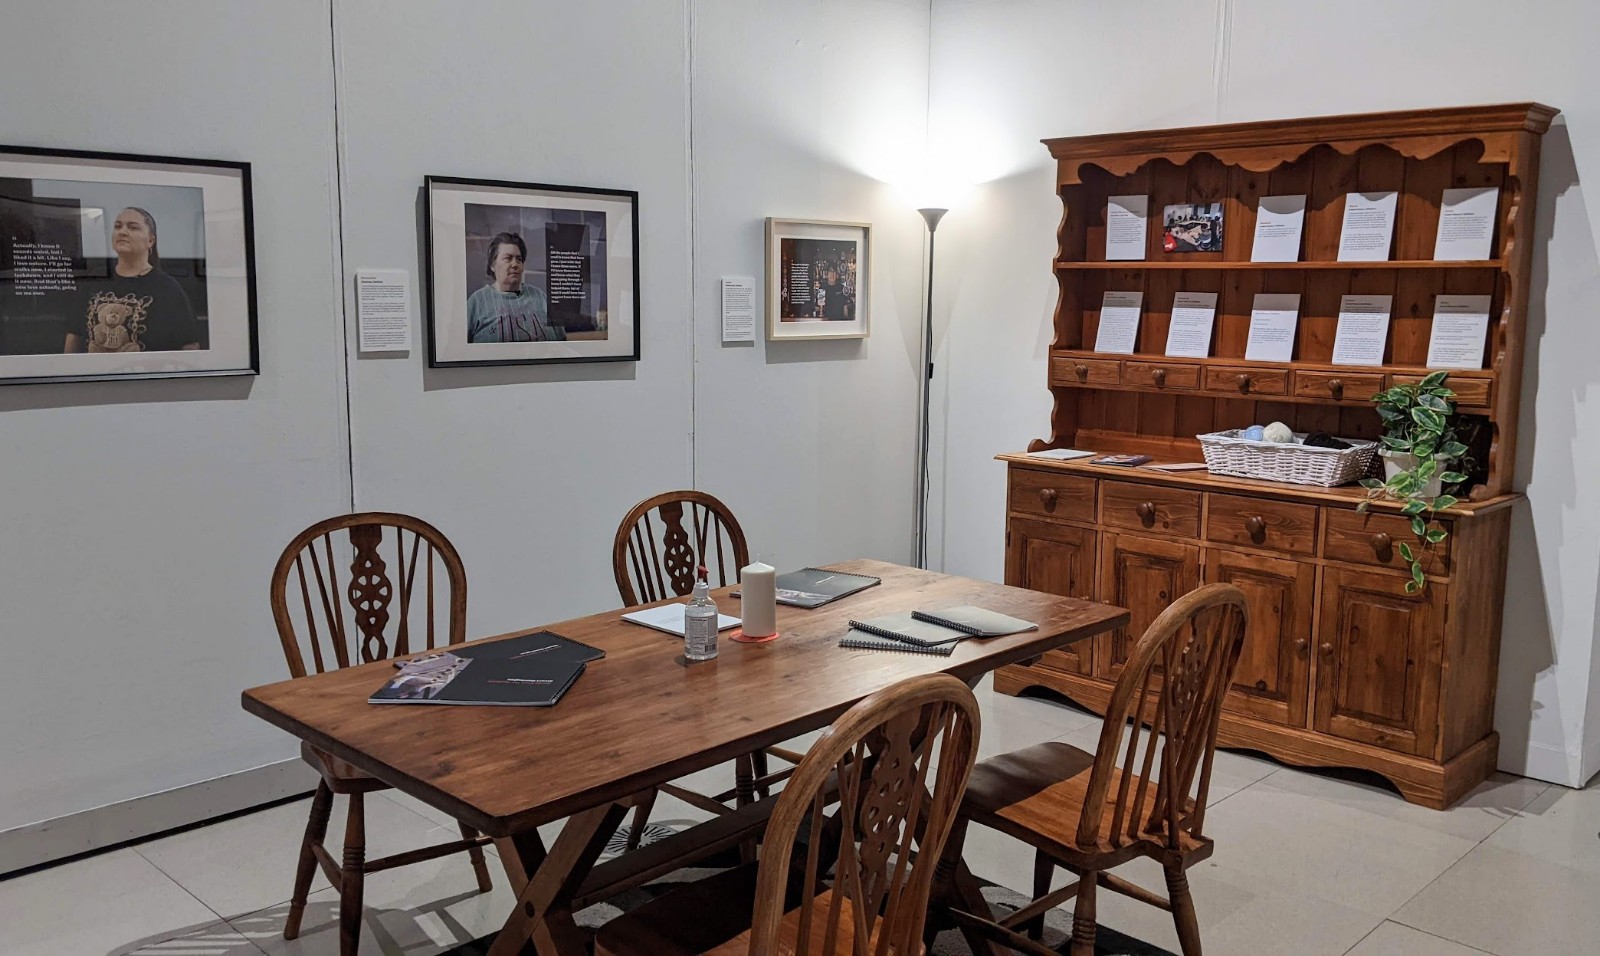 Dining room table with chairs, and a wall unit with surrounding pandemic stories and photobook on the table